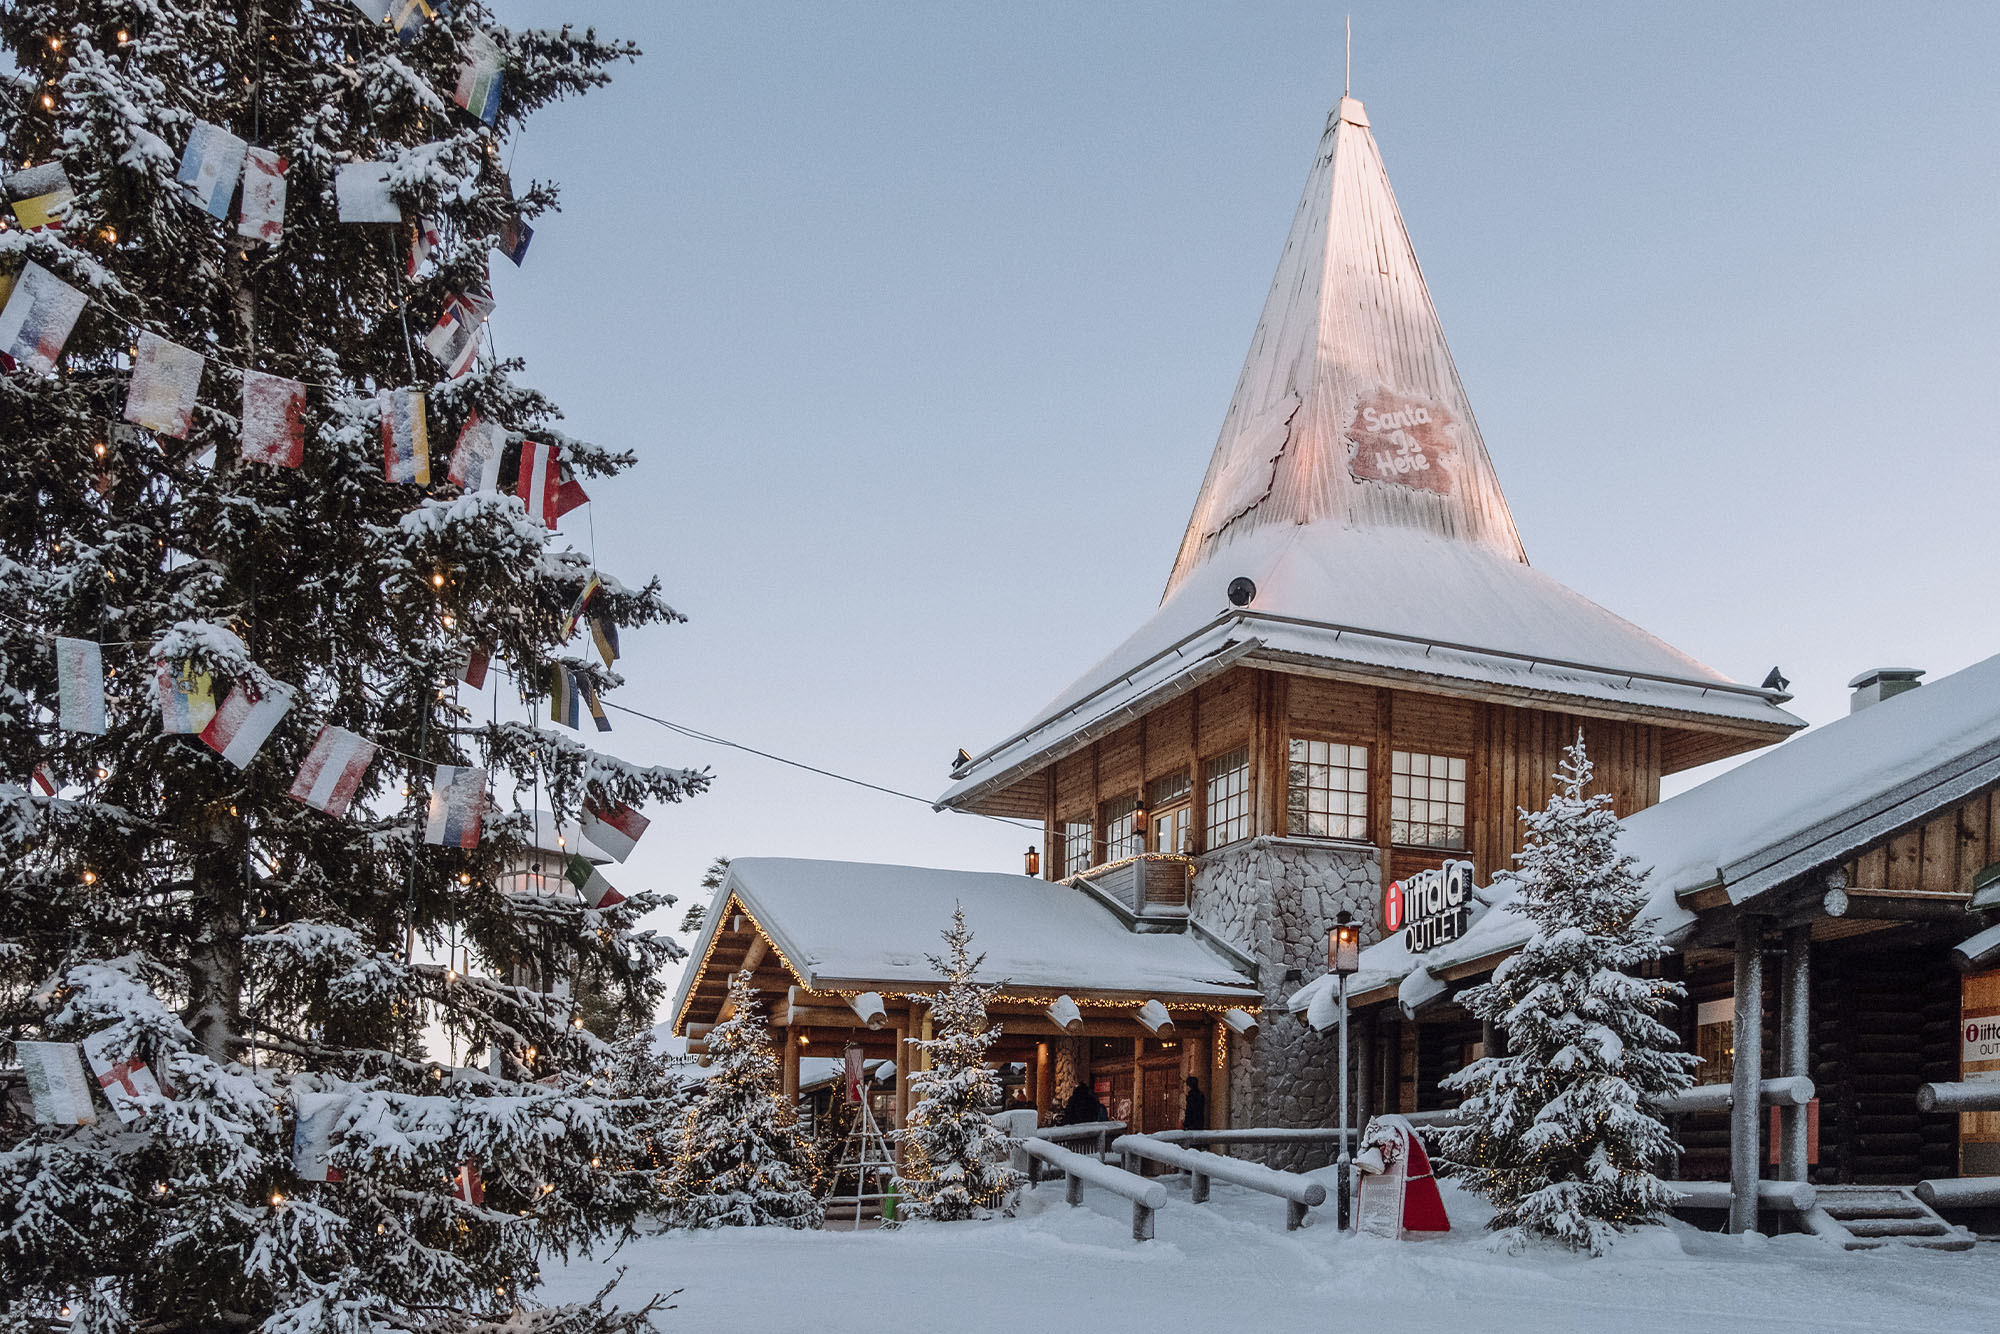 Santa's Village in Lapland, Finland - book a trip with FLighthub